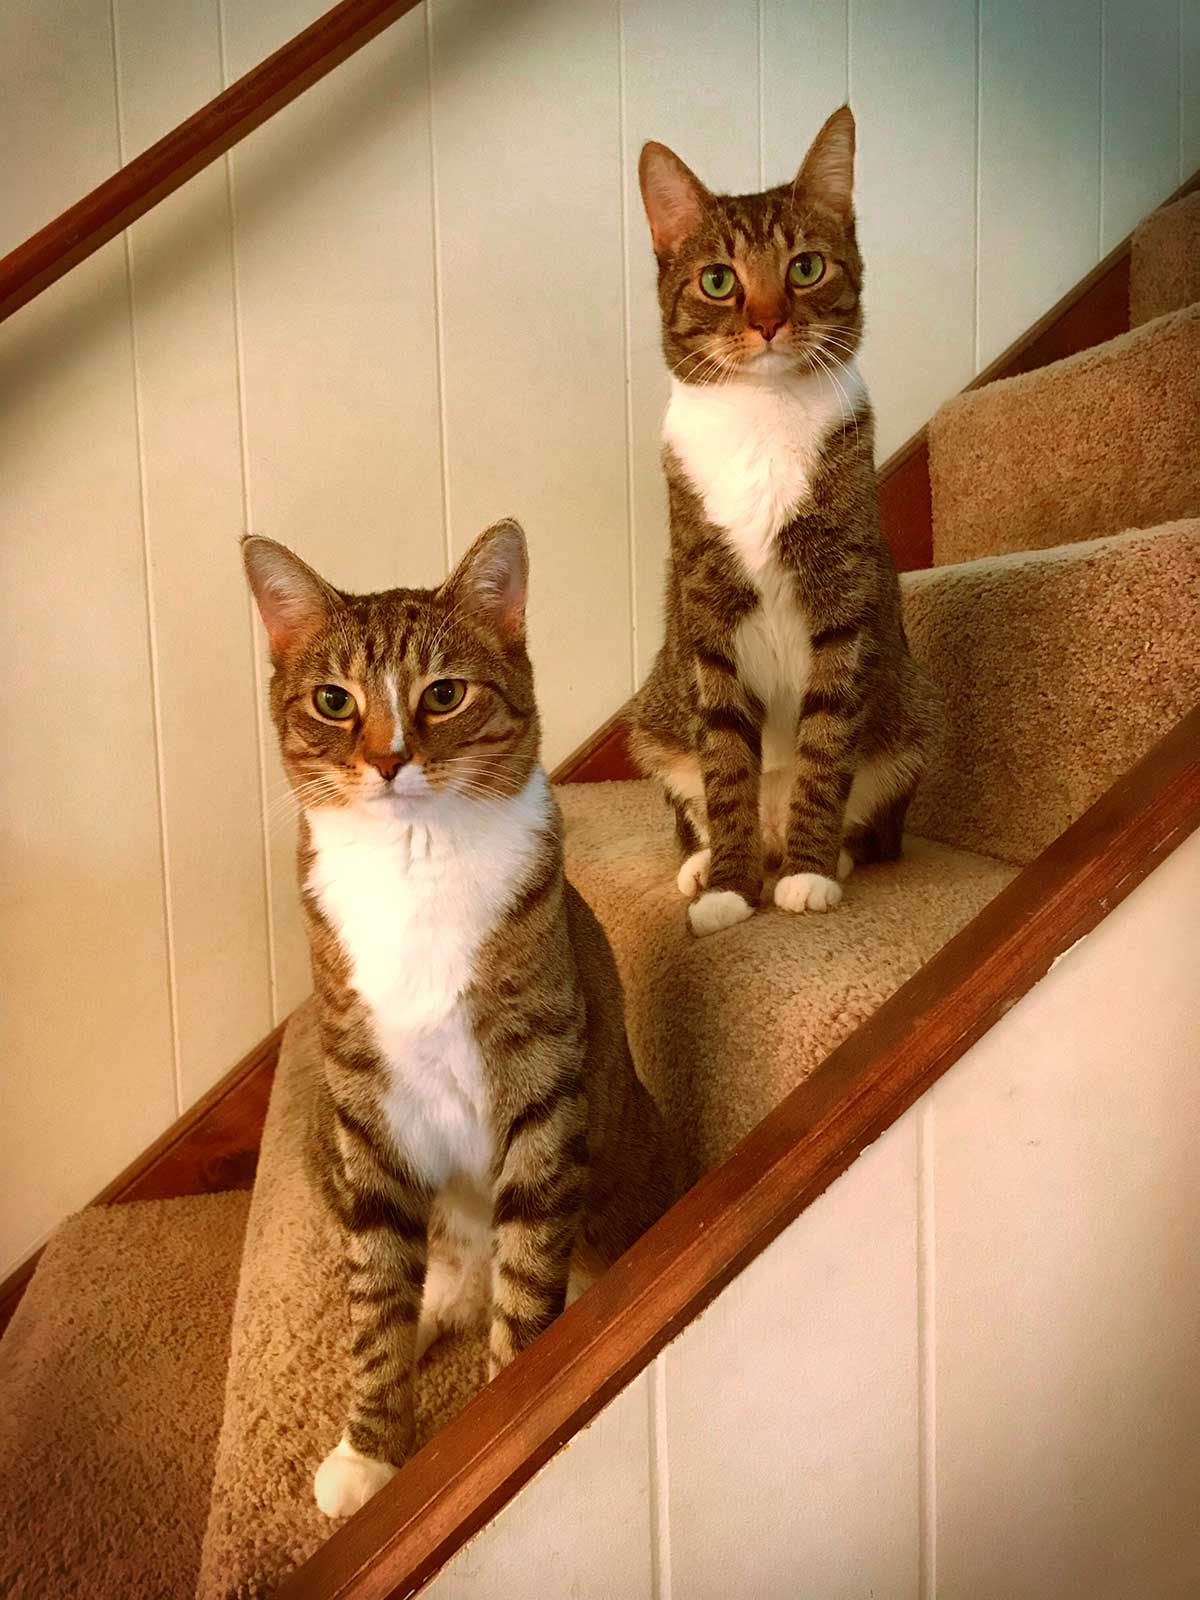 Cat sitting two tabby cats